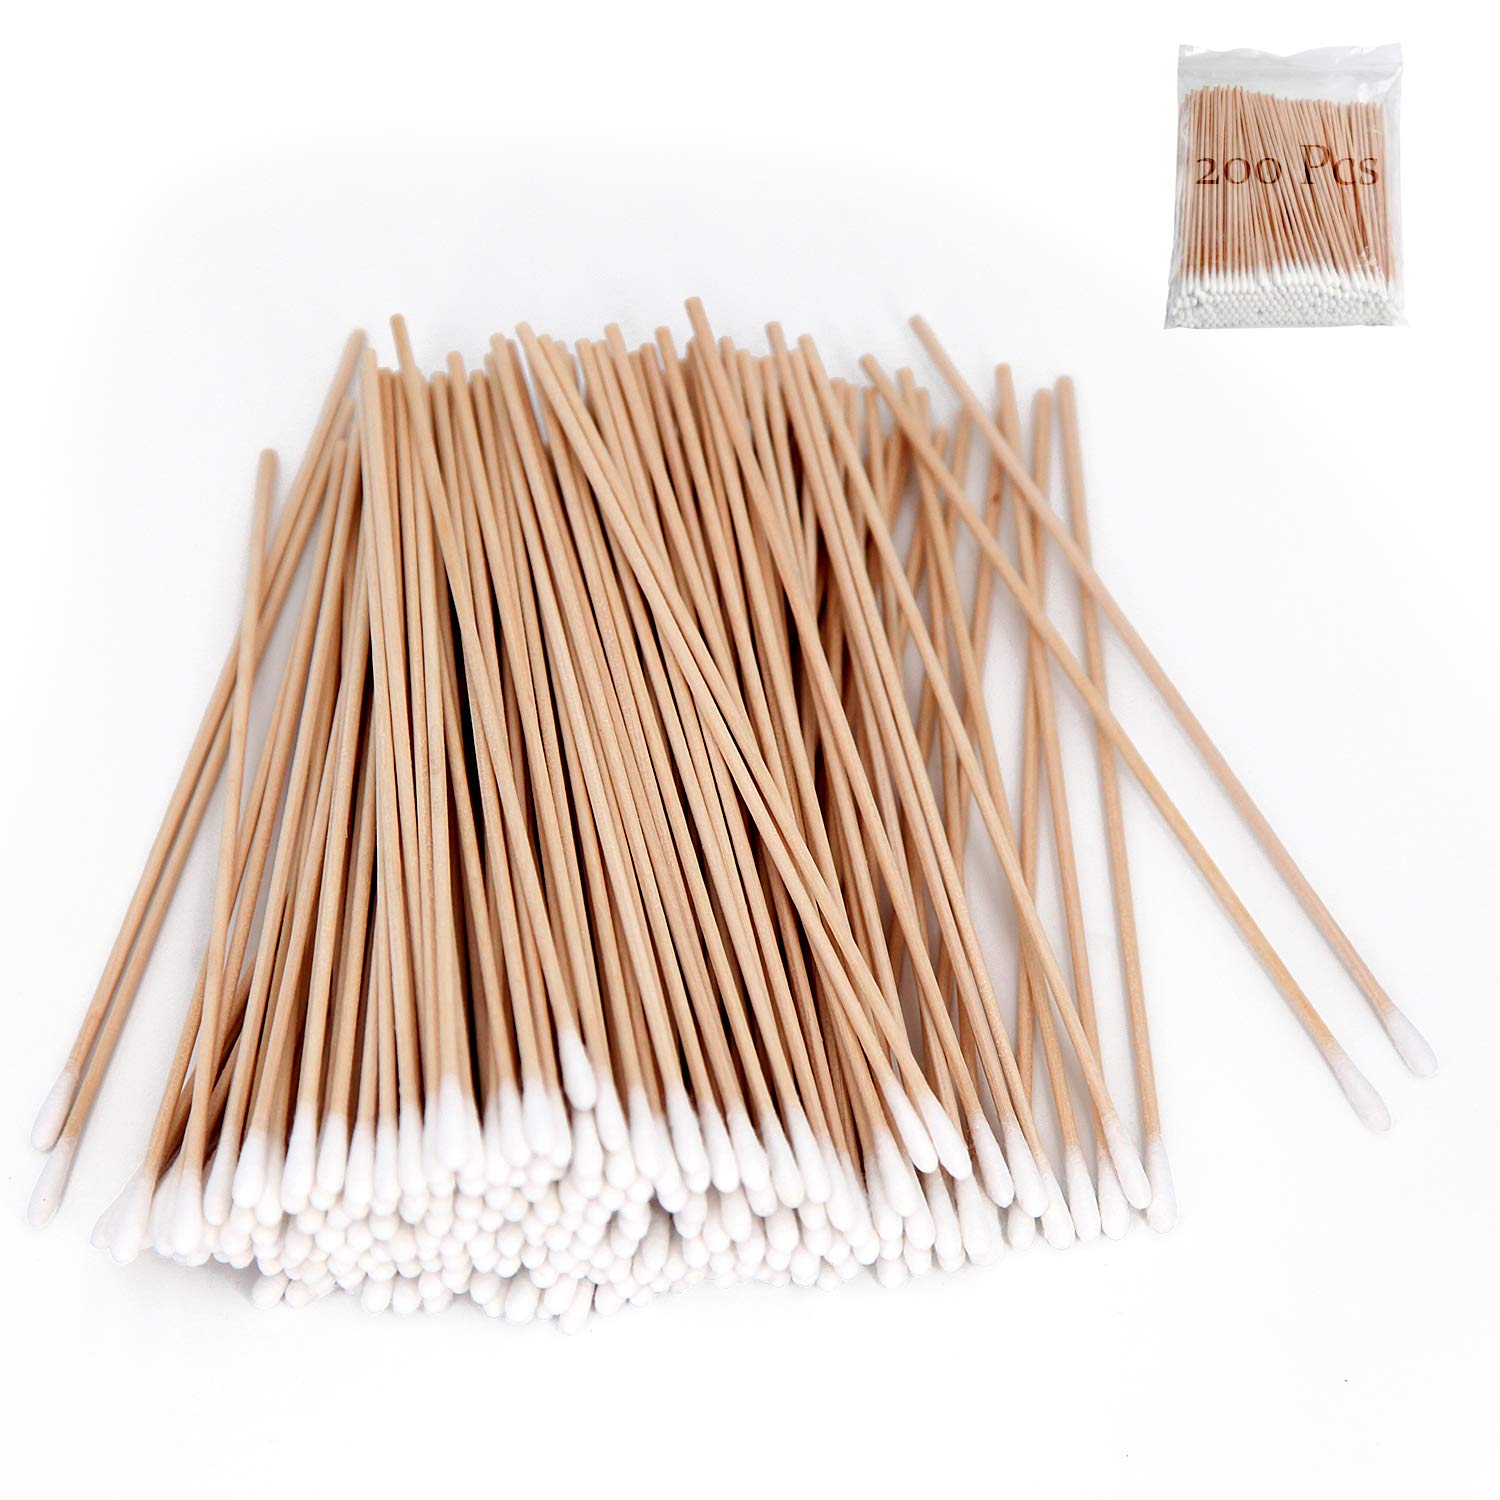 6 inch Long Cotton Swabs 400 Pcs for Pets, Gun Cleaning or Makeup 